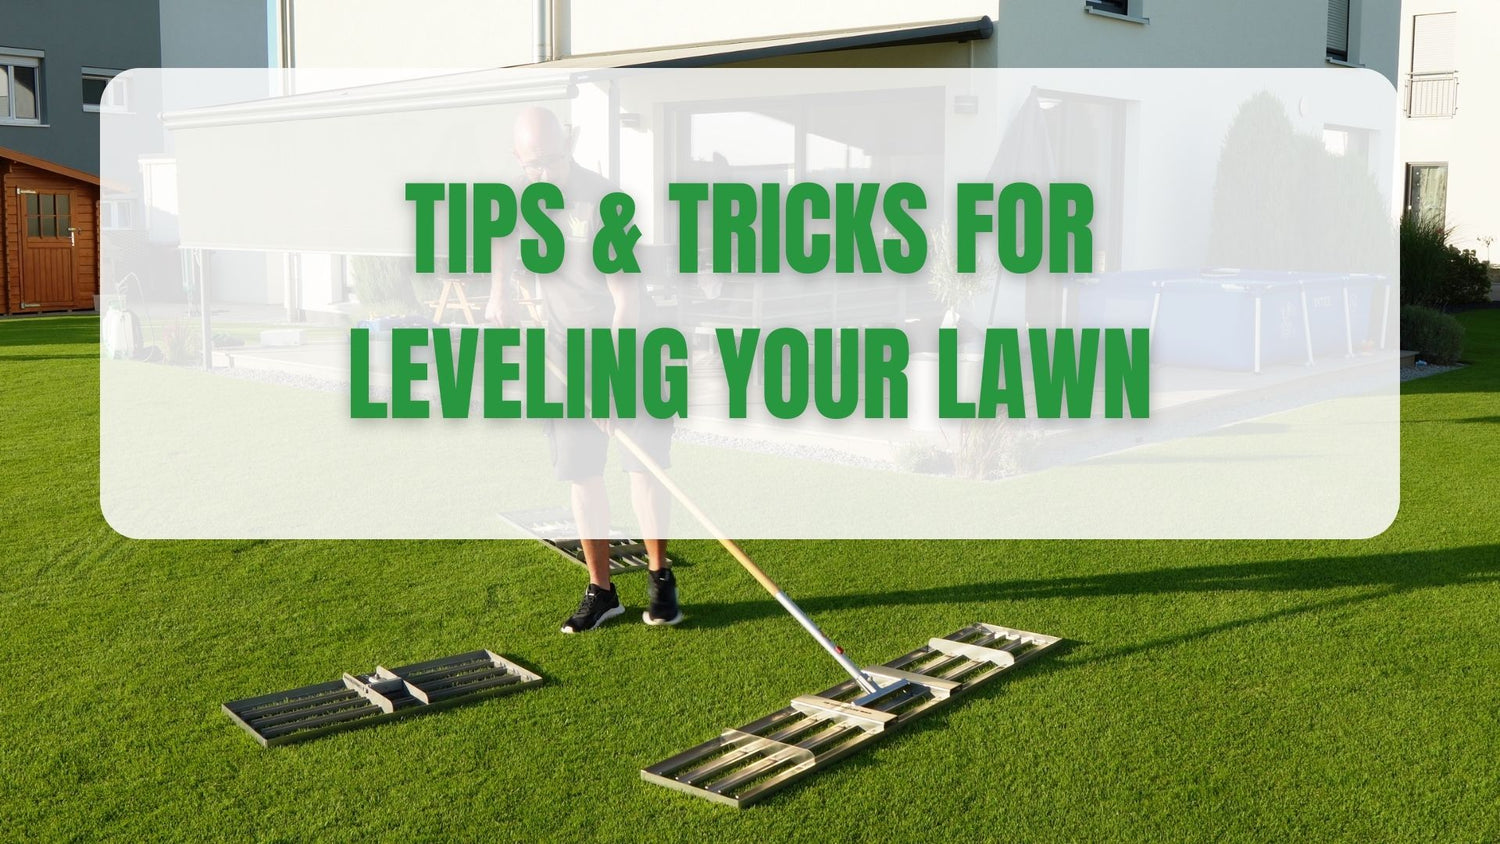 Tips & tricks for leveling your lawn